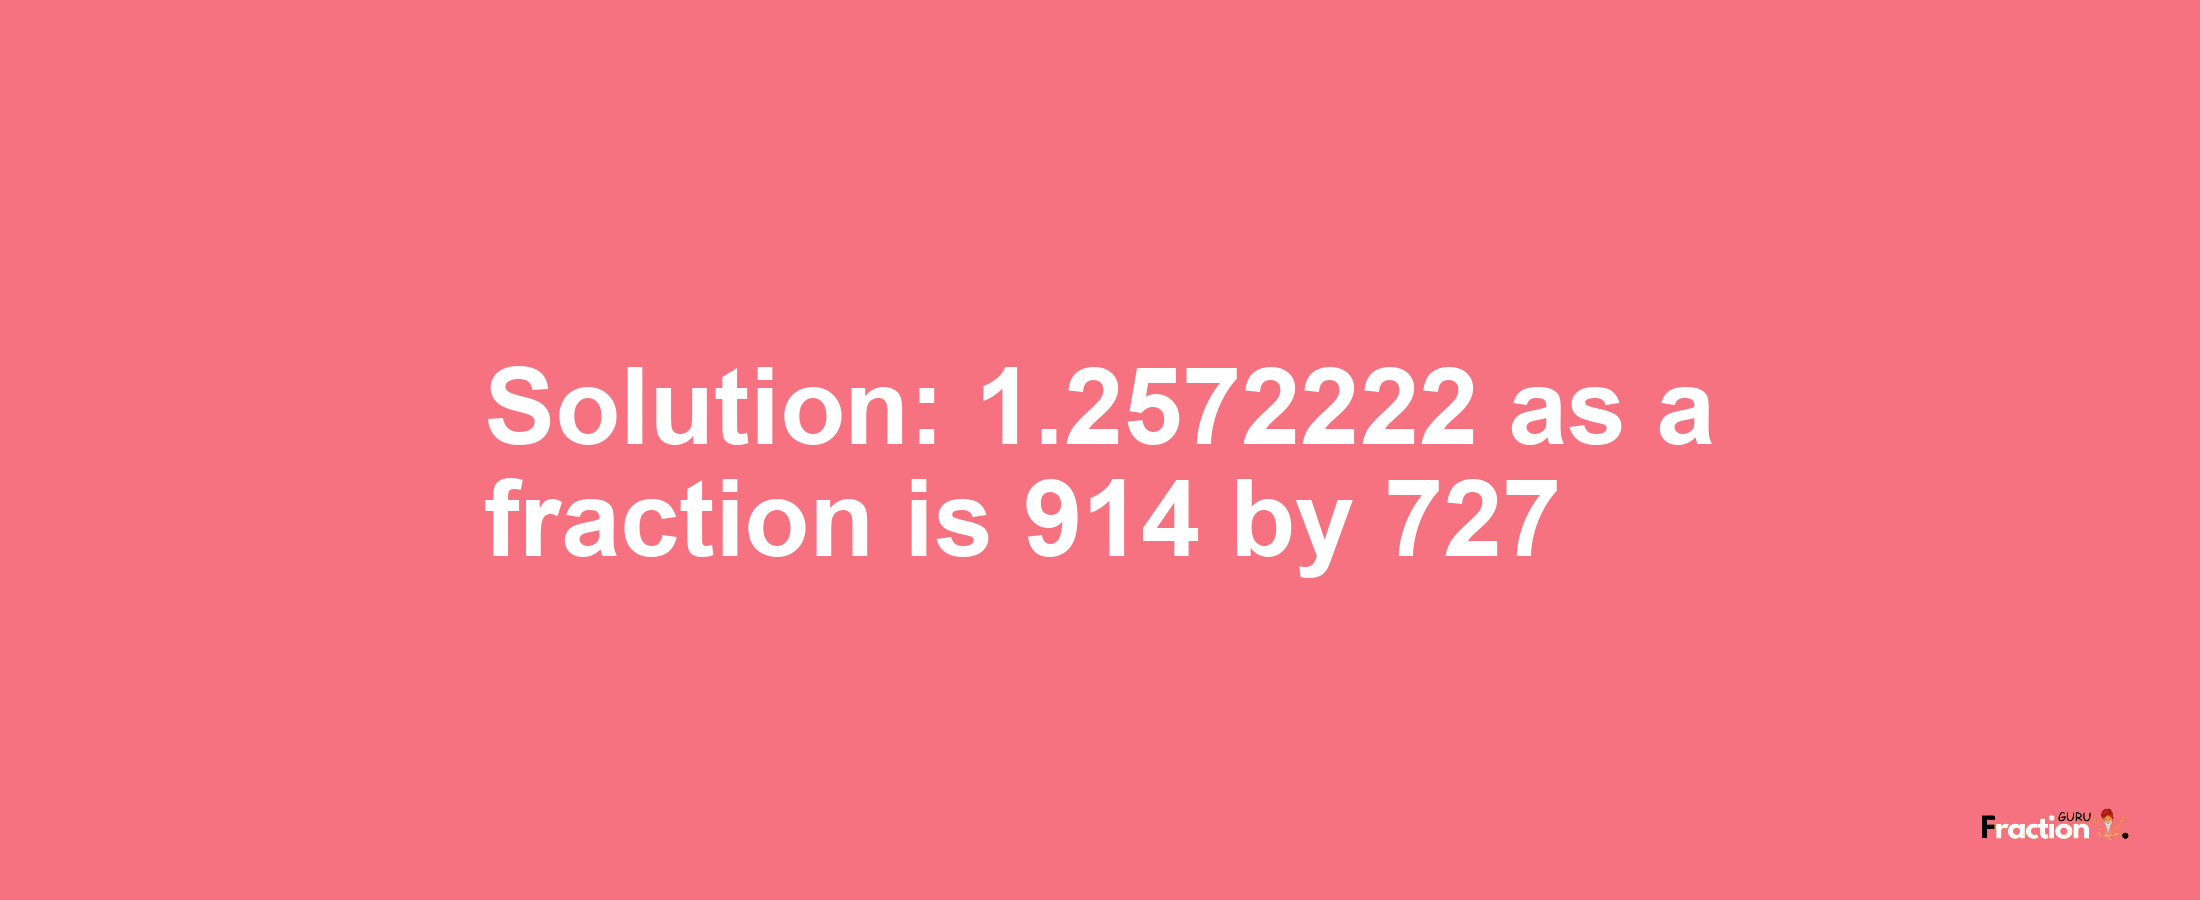 Solution:1.2572222 as a fraction is 914/727